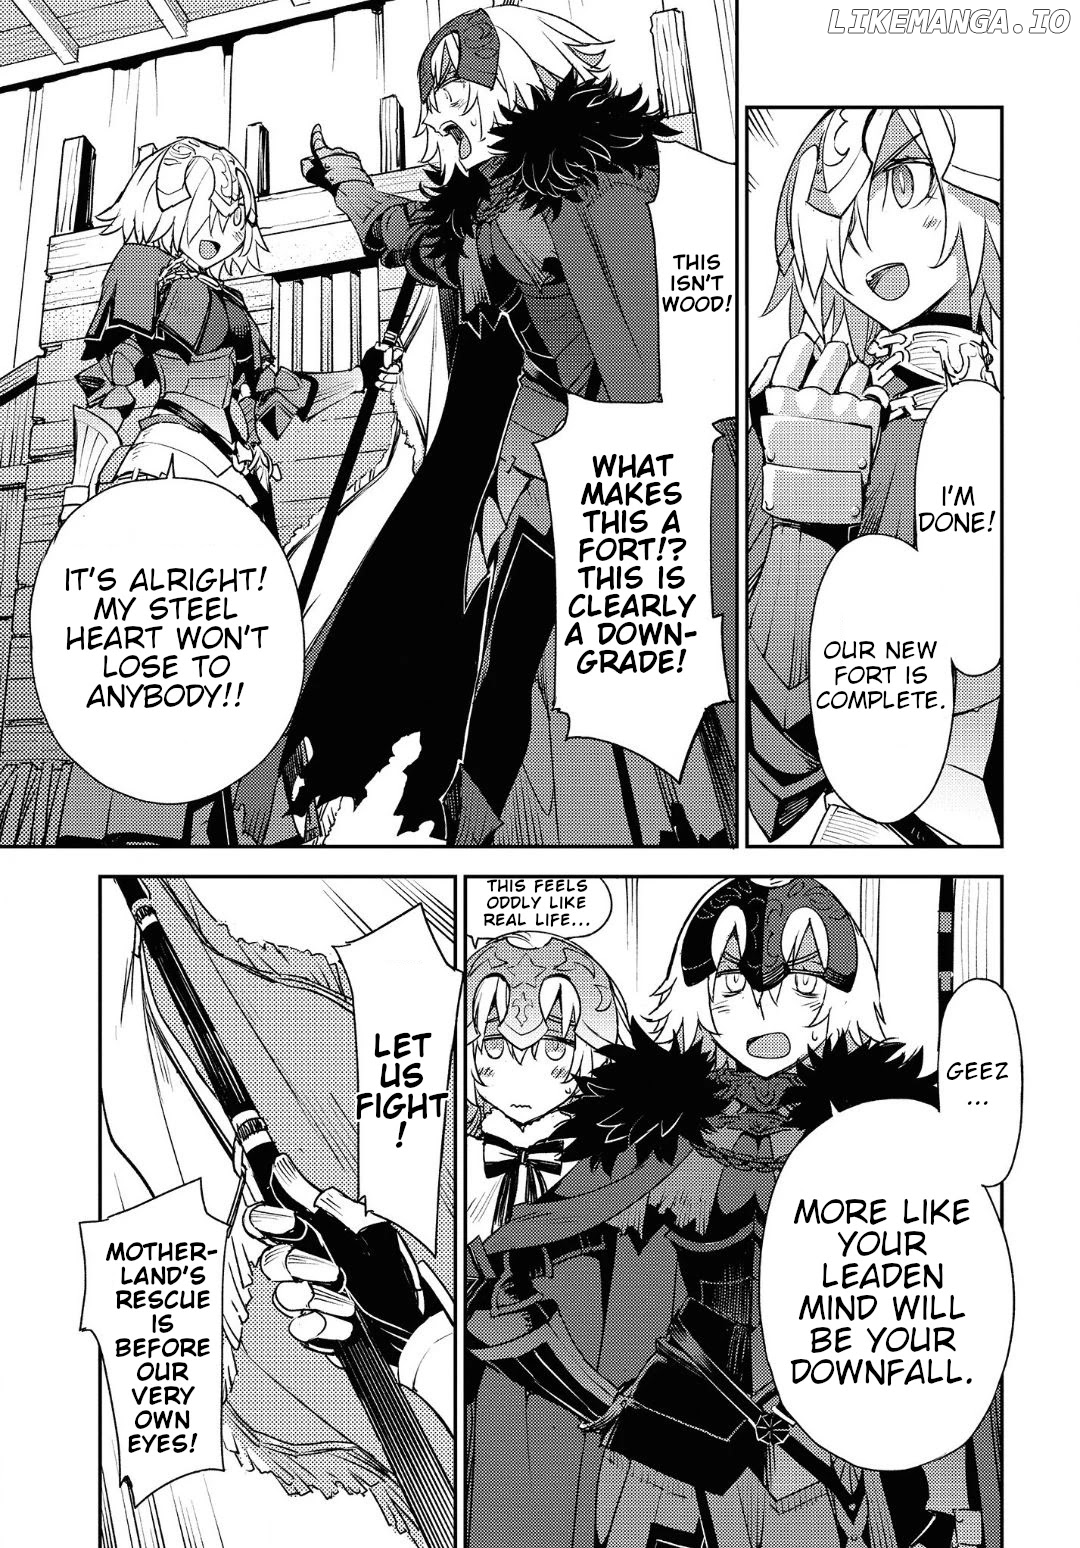 Fate/Grand Order: Epic of Remnant - Subspecies Singularity IV: Taboo Advent Salem: Salem of Heresy chapter 14 - page 6